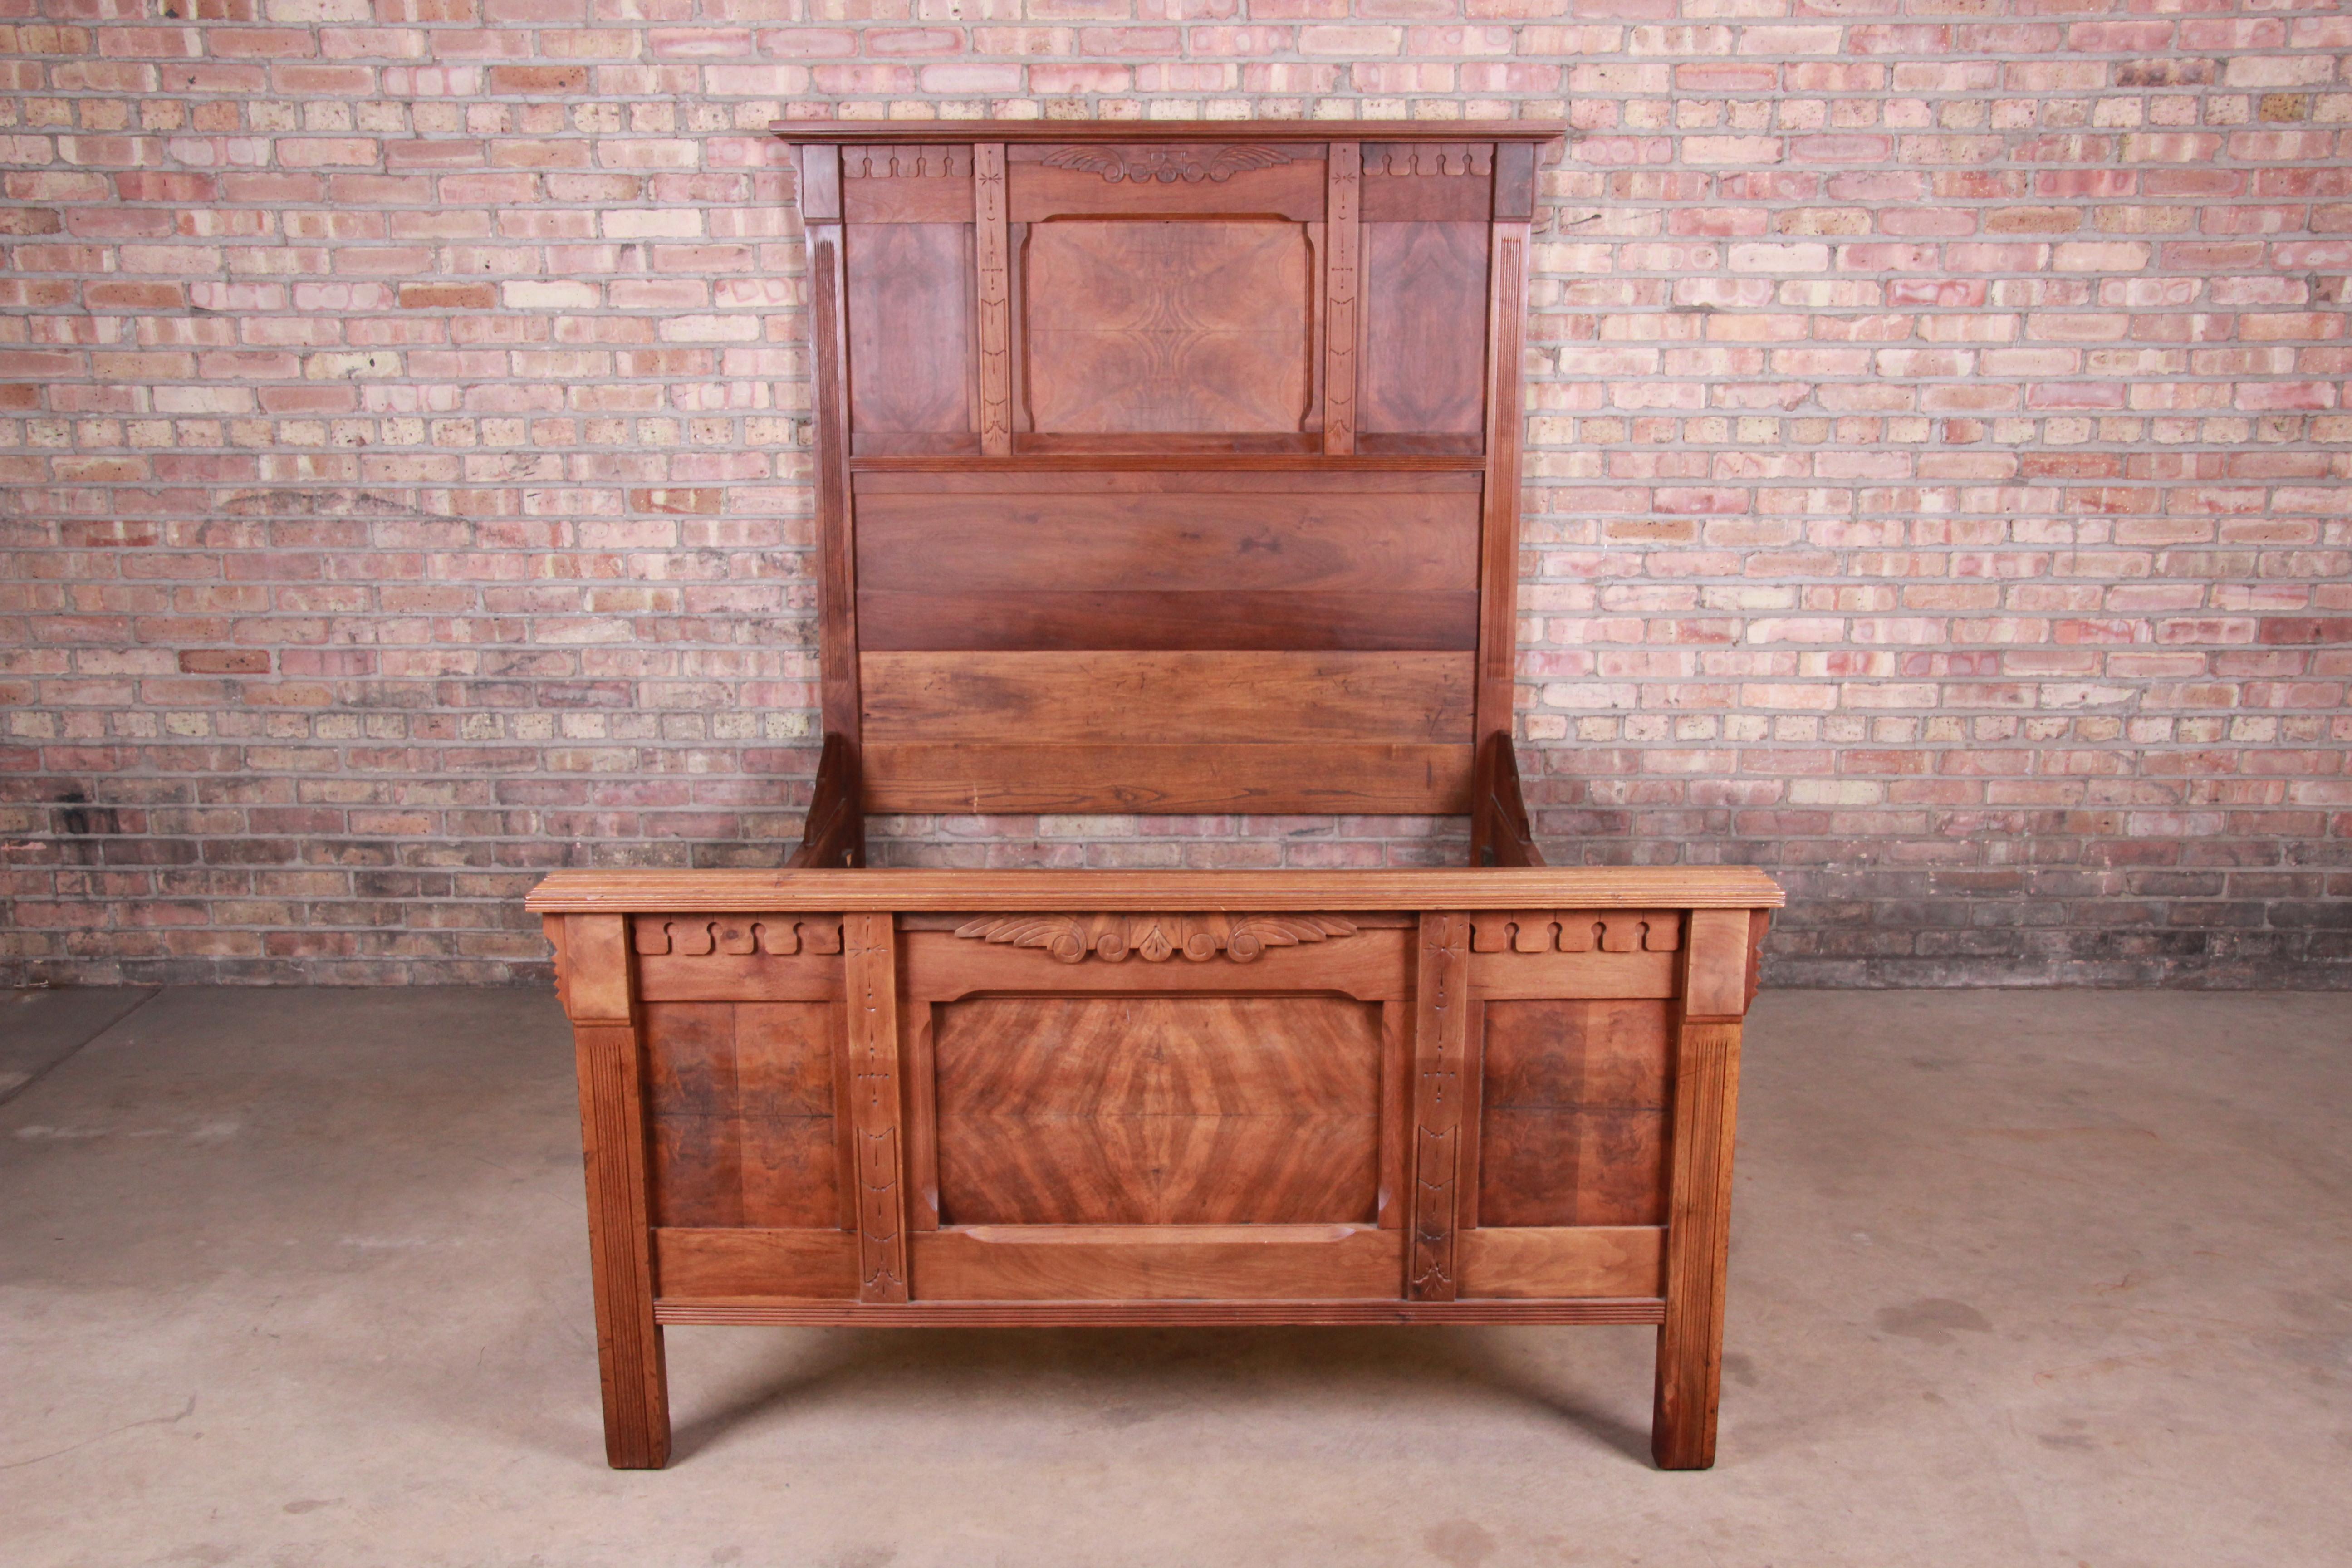 A gorgeous Victorian Eastlake burled walnut full size bed frame

USA, circa 1880s

Measures: 60